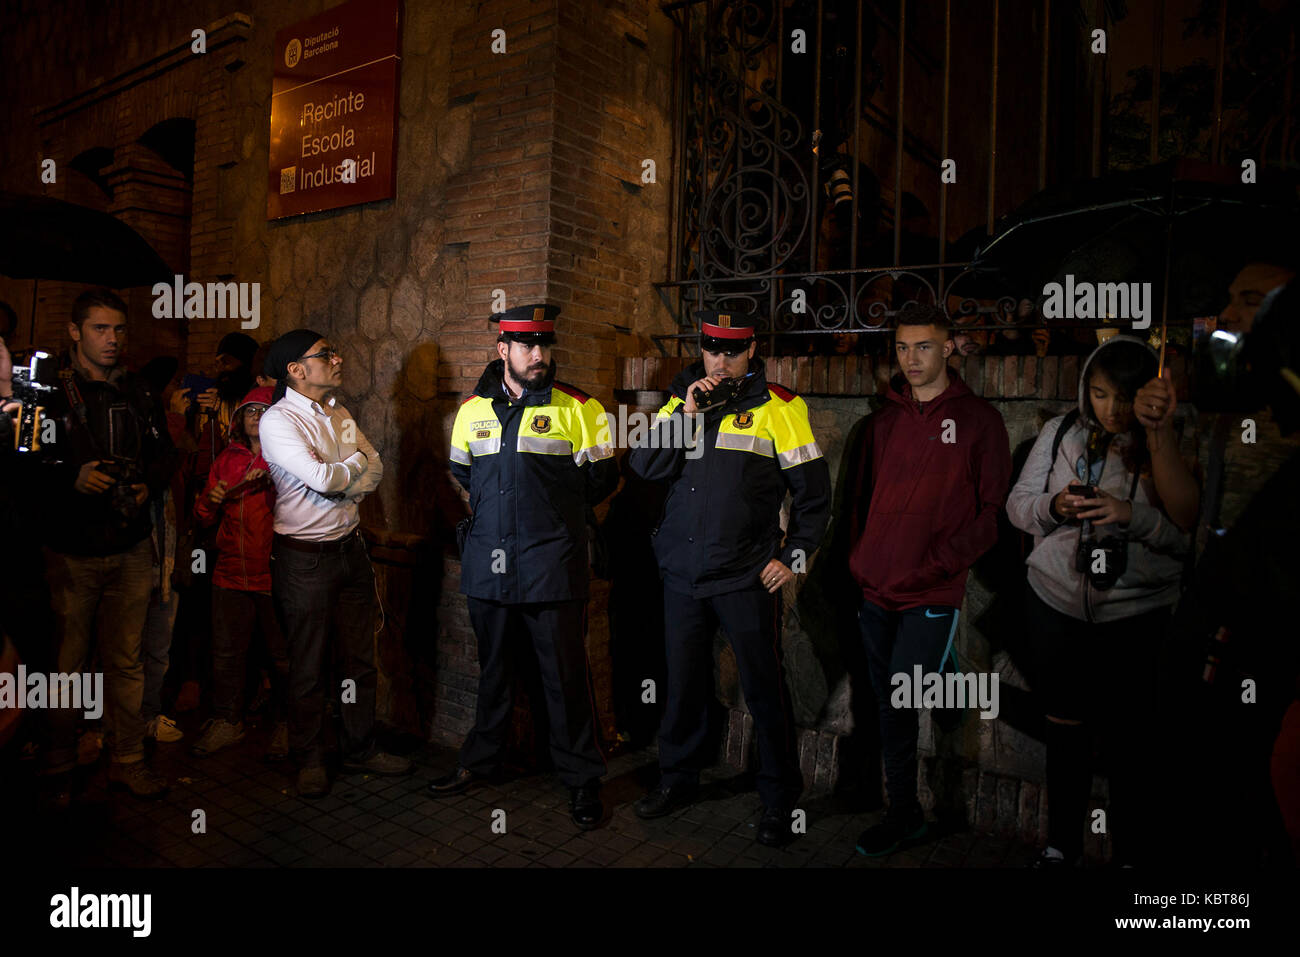 Catalan police of the 'Mossos d·Esquadra' standing among people who have gathered outside Escola de Treball school in Barcelona, Spain, in the early houes of 1 October 2017. Hundreds of people have assembled around polling stations in Catalonia to protect the buildings for the independence referendum set for this day. Photo: Nicolas Carvalho Ochoa/dpa Stock Photo